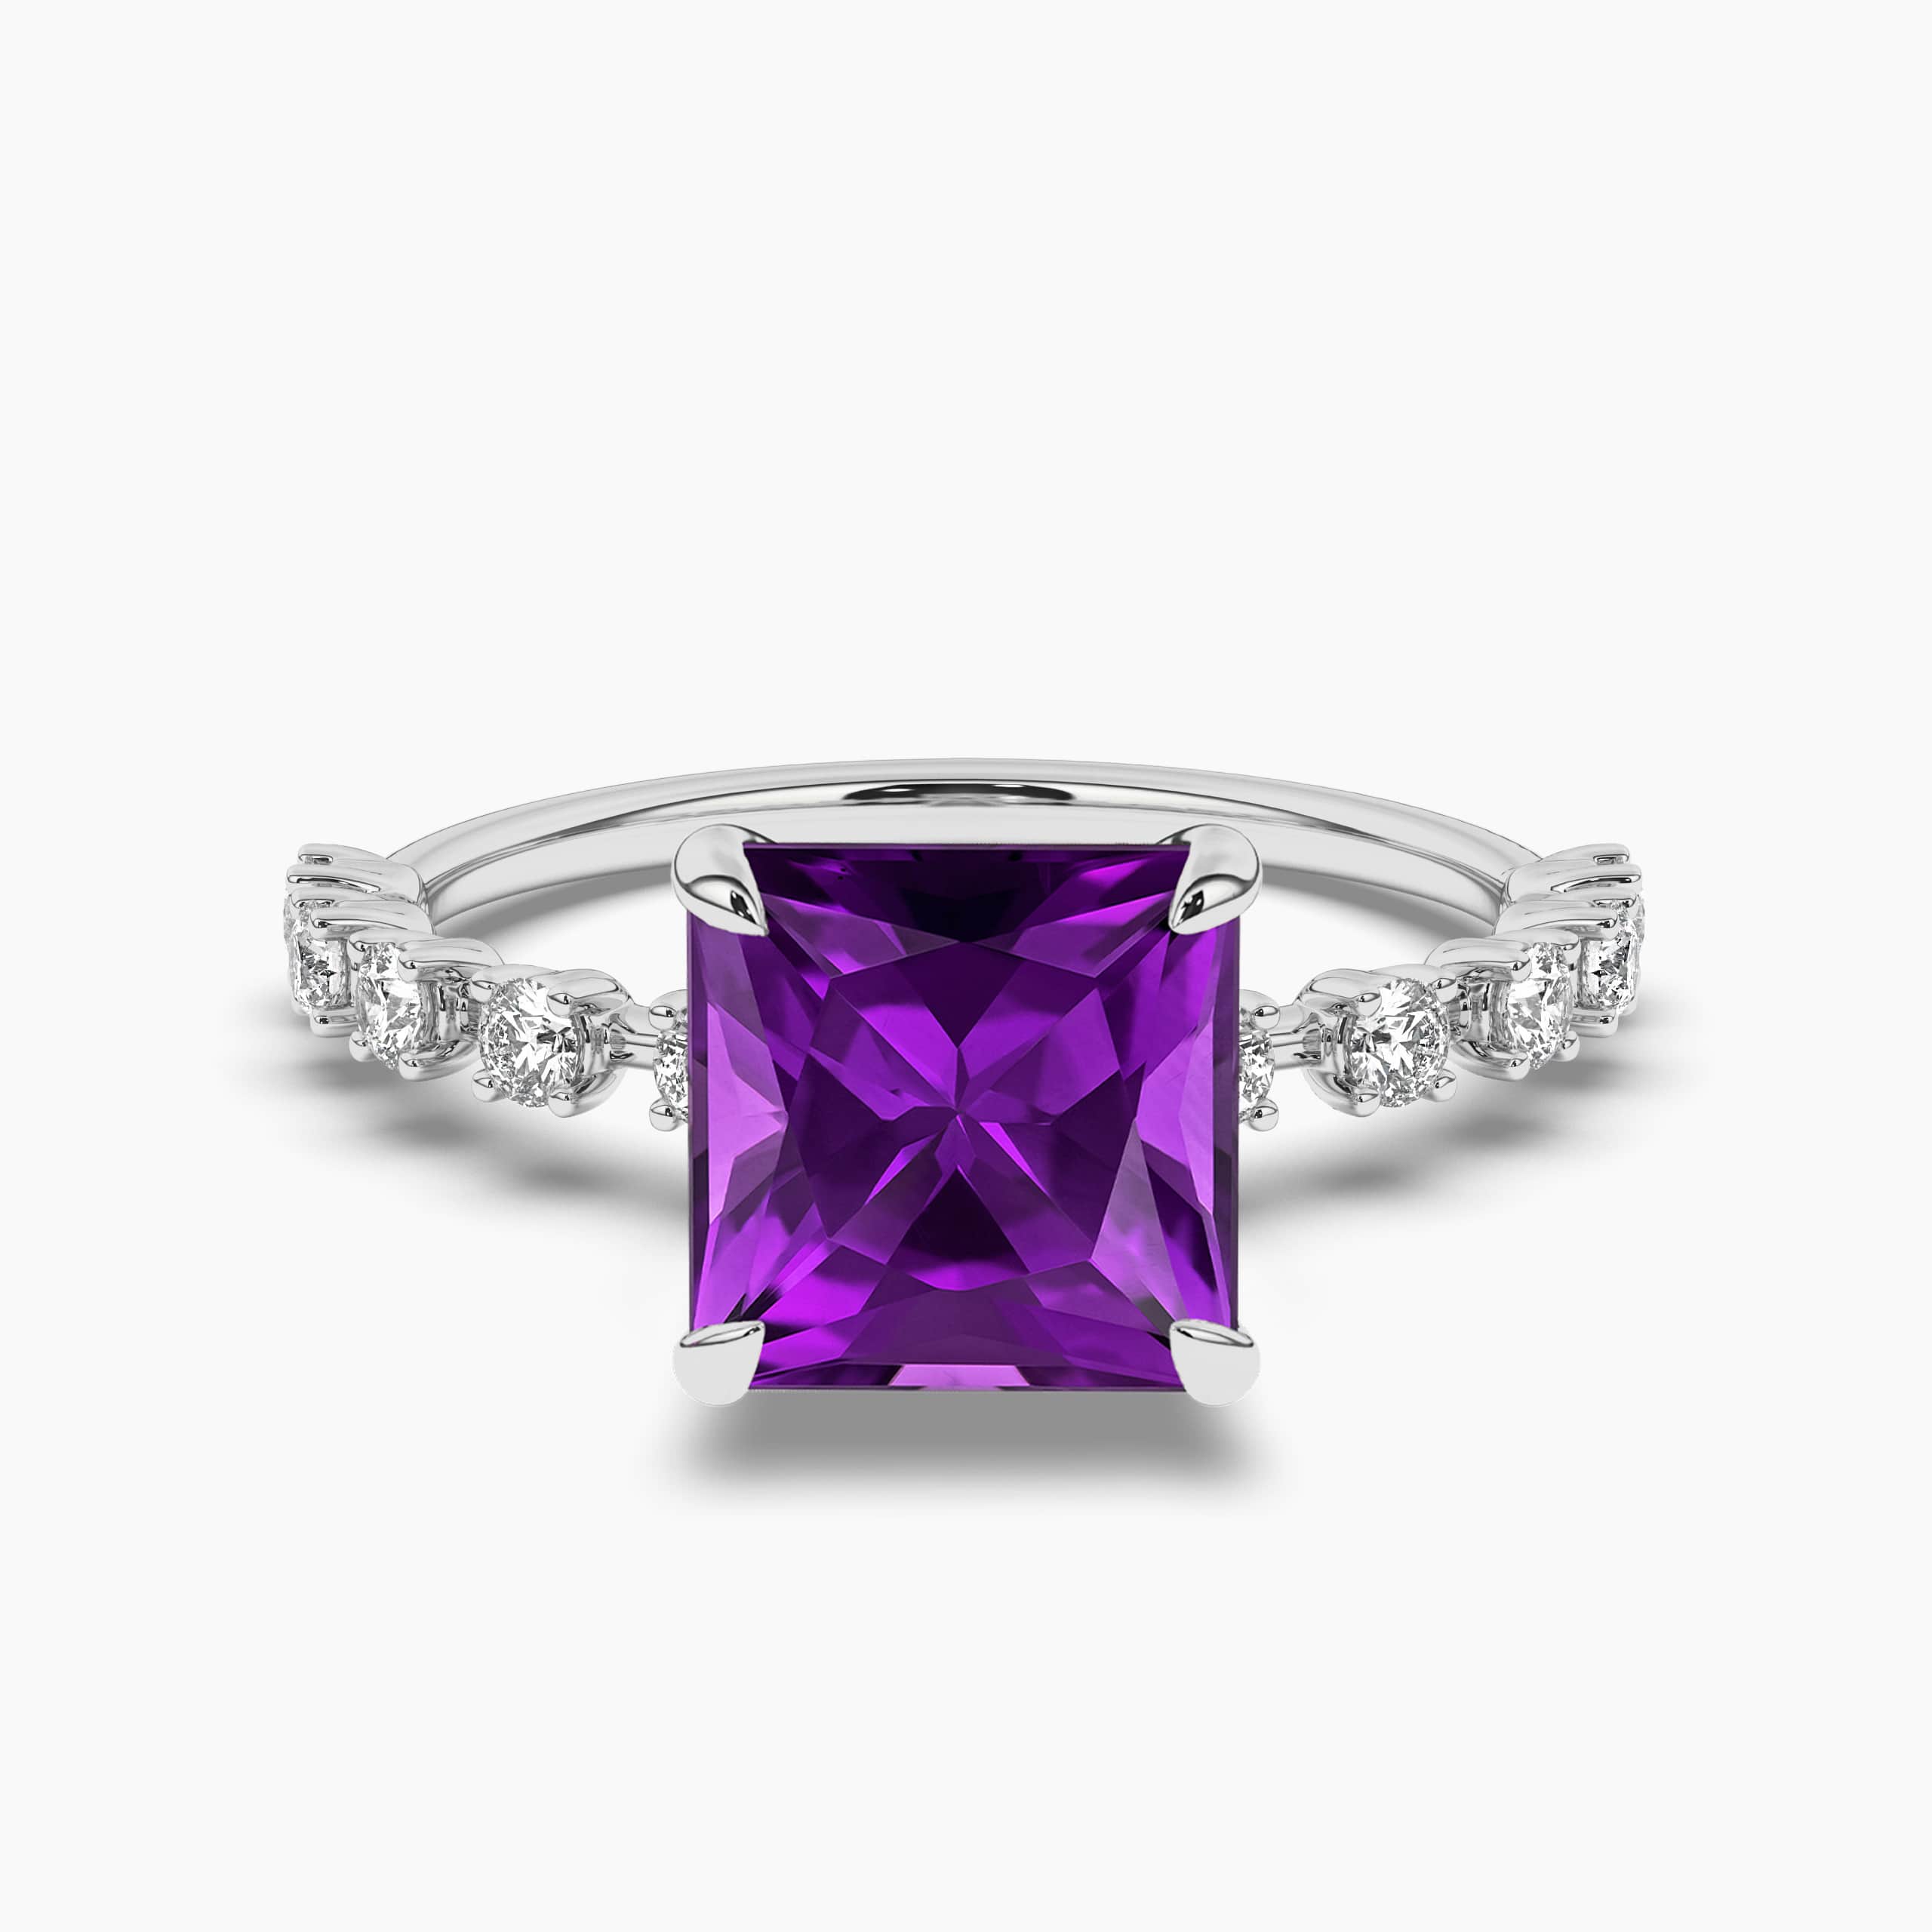 Princess-Cut Amethyst and Diamond Engagement Ring in White Gold